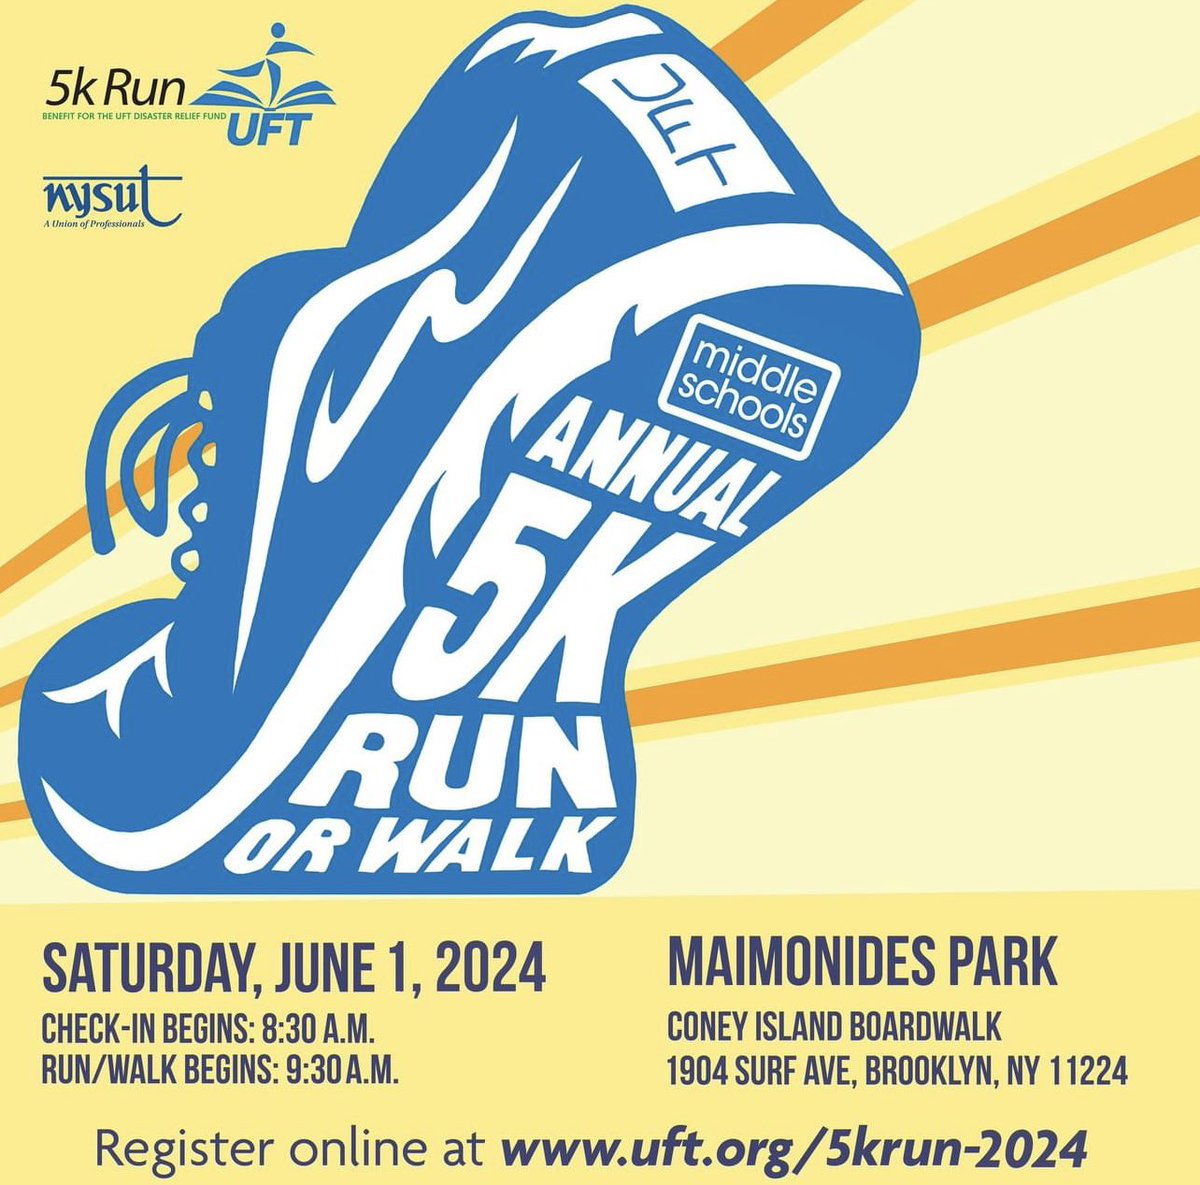 Get those 👟👟👟Ready, Save the Date June 1st! The annual 5k run or walk in Coney Island on June 1 should be loads of fun! Register at uft.org/5krun-2024.